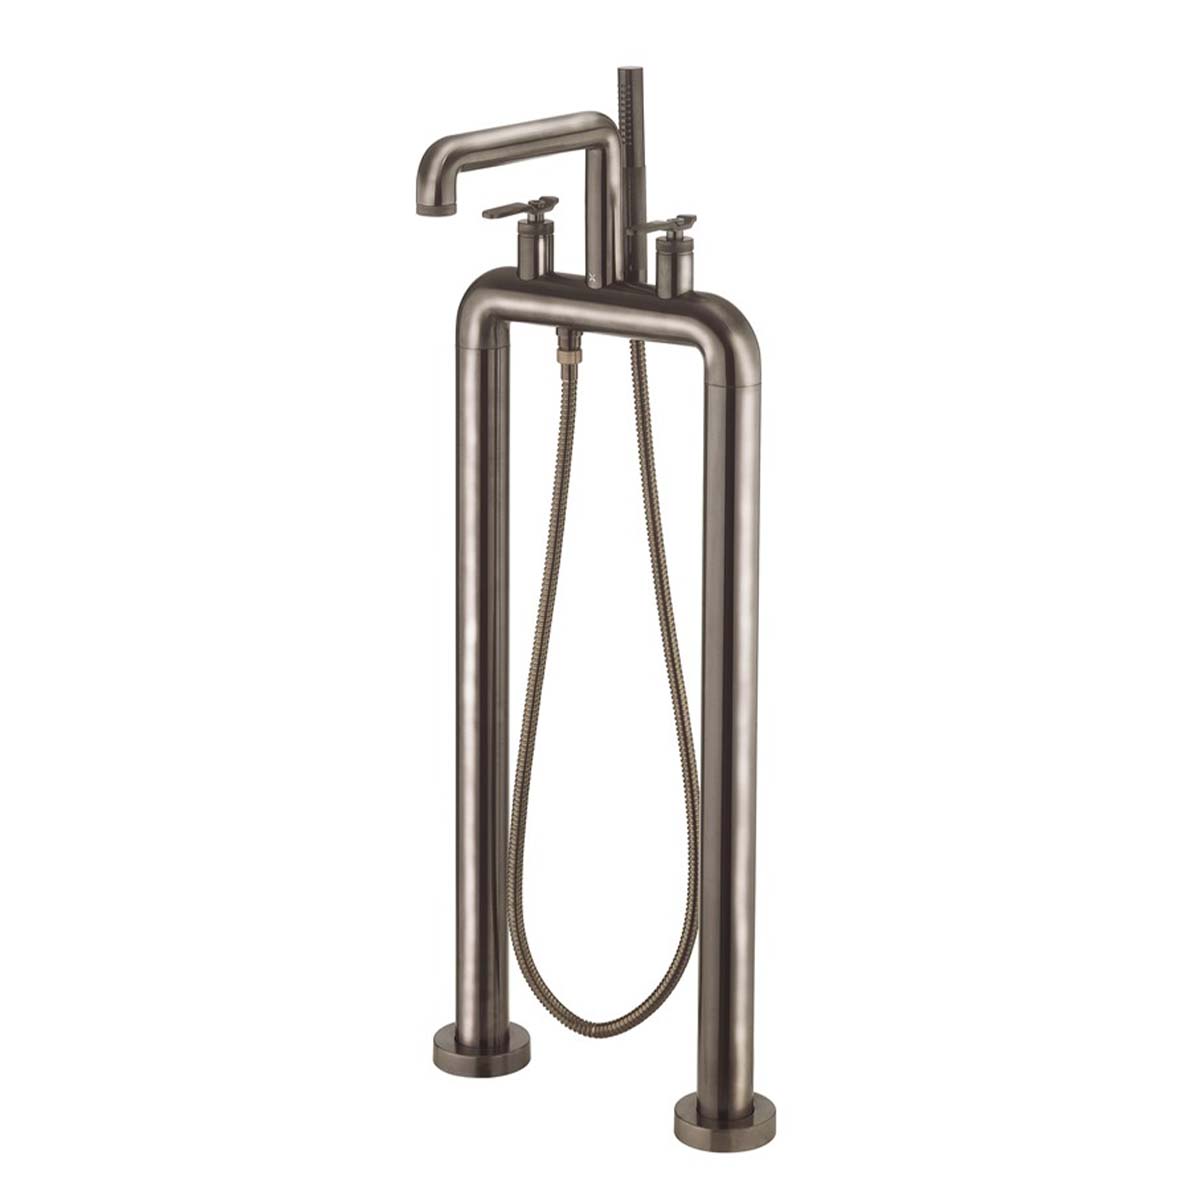 Crosswater Union Bath Shower Mixer With Lever Handles Brushed Black Chrome